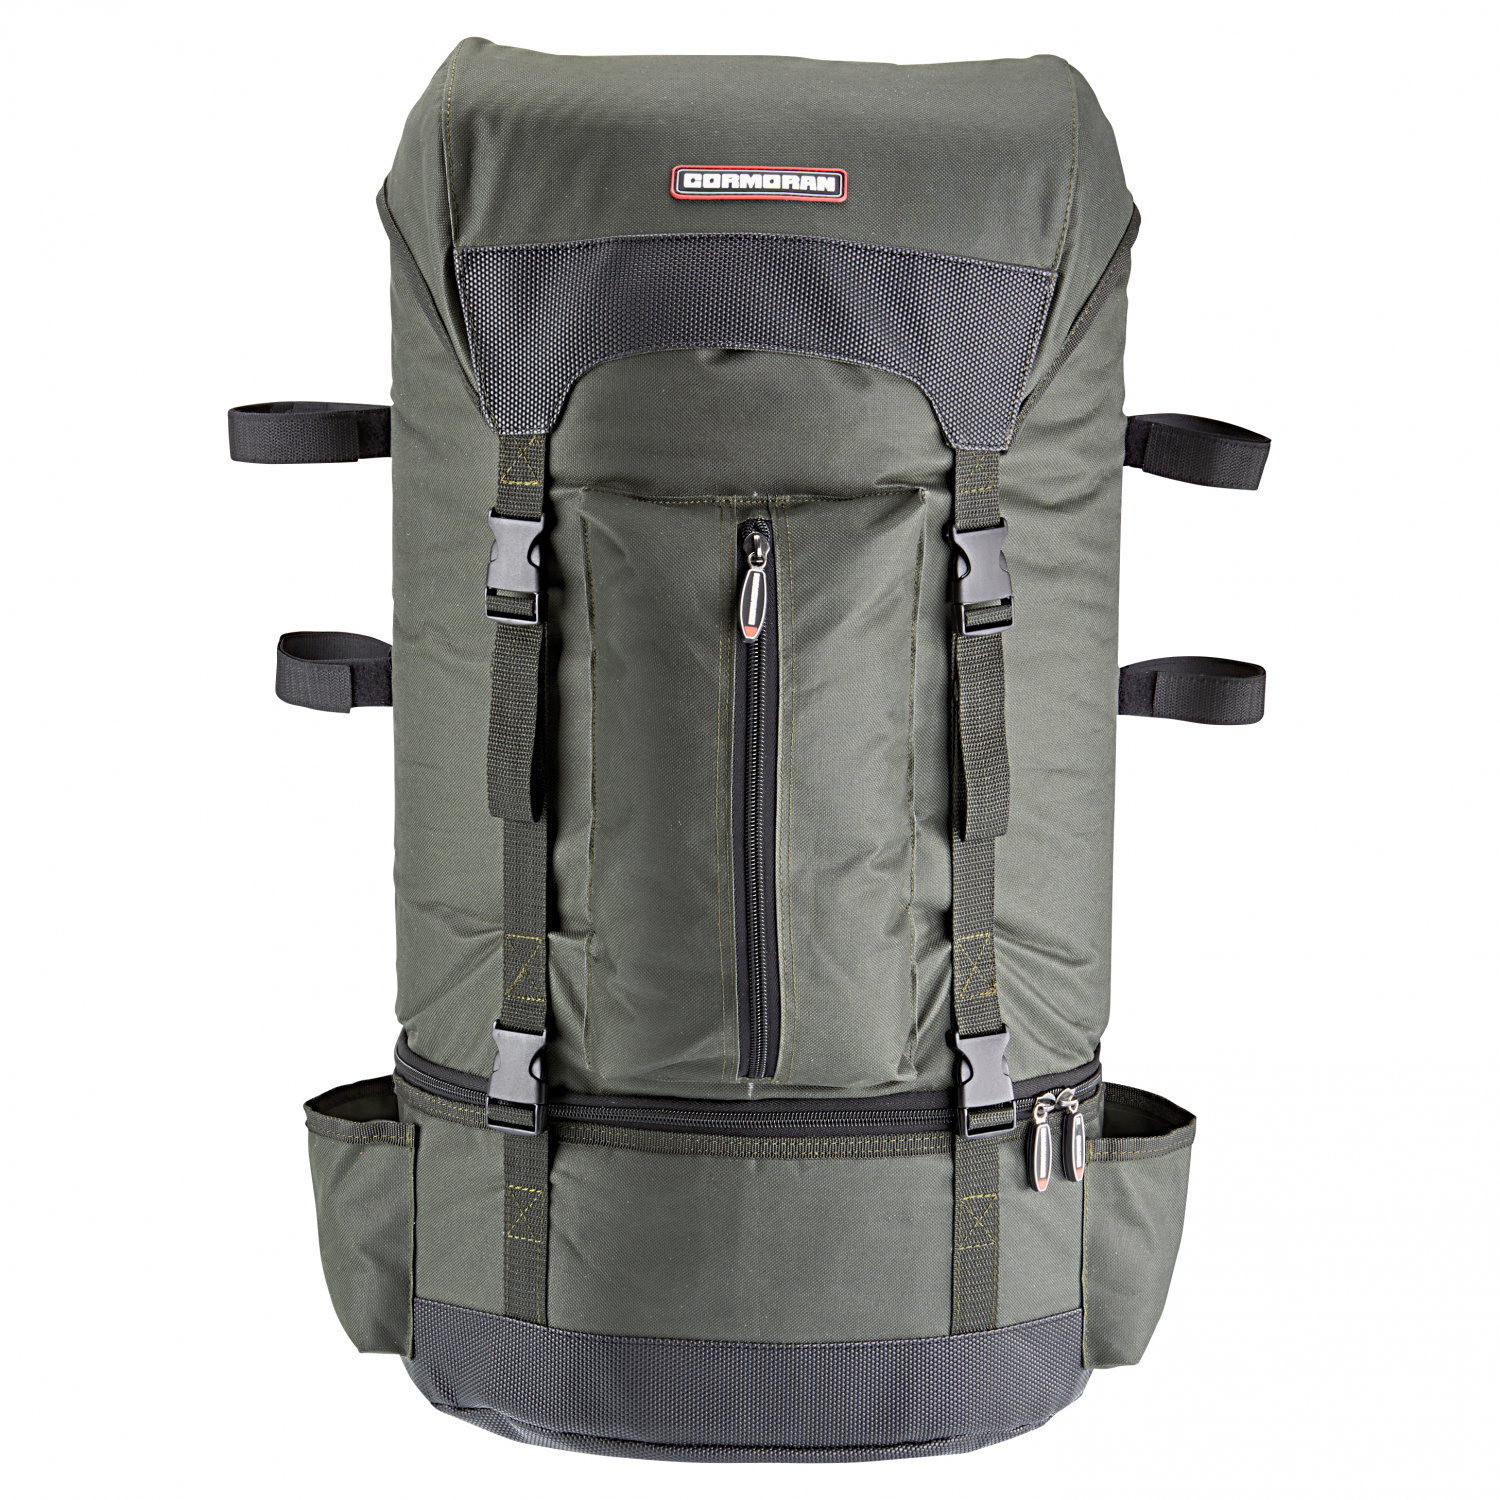 Cormoran Large Backpack Model (3039) at low prices